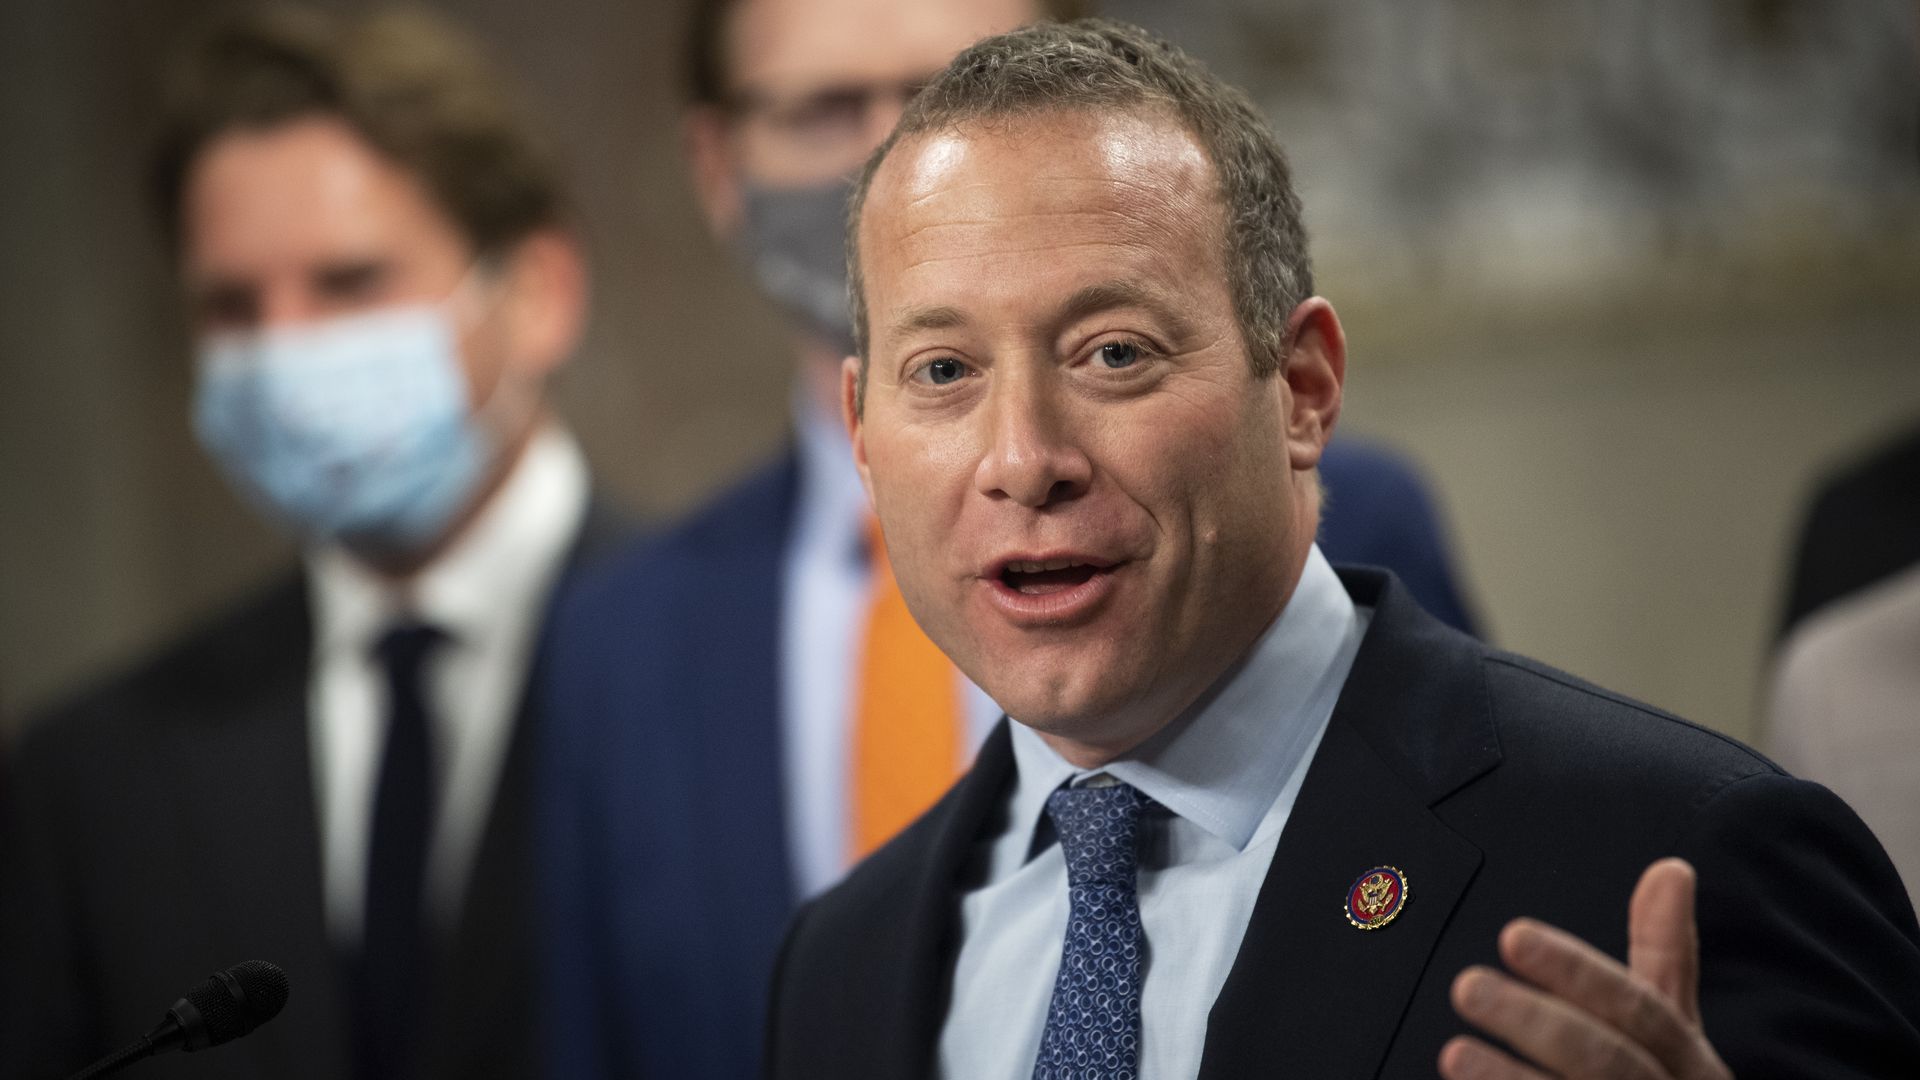  Rep. Josh Gottheimer, D-N.J., speaks during a news conference with a group of bipartisan lawmakers 